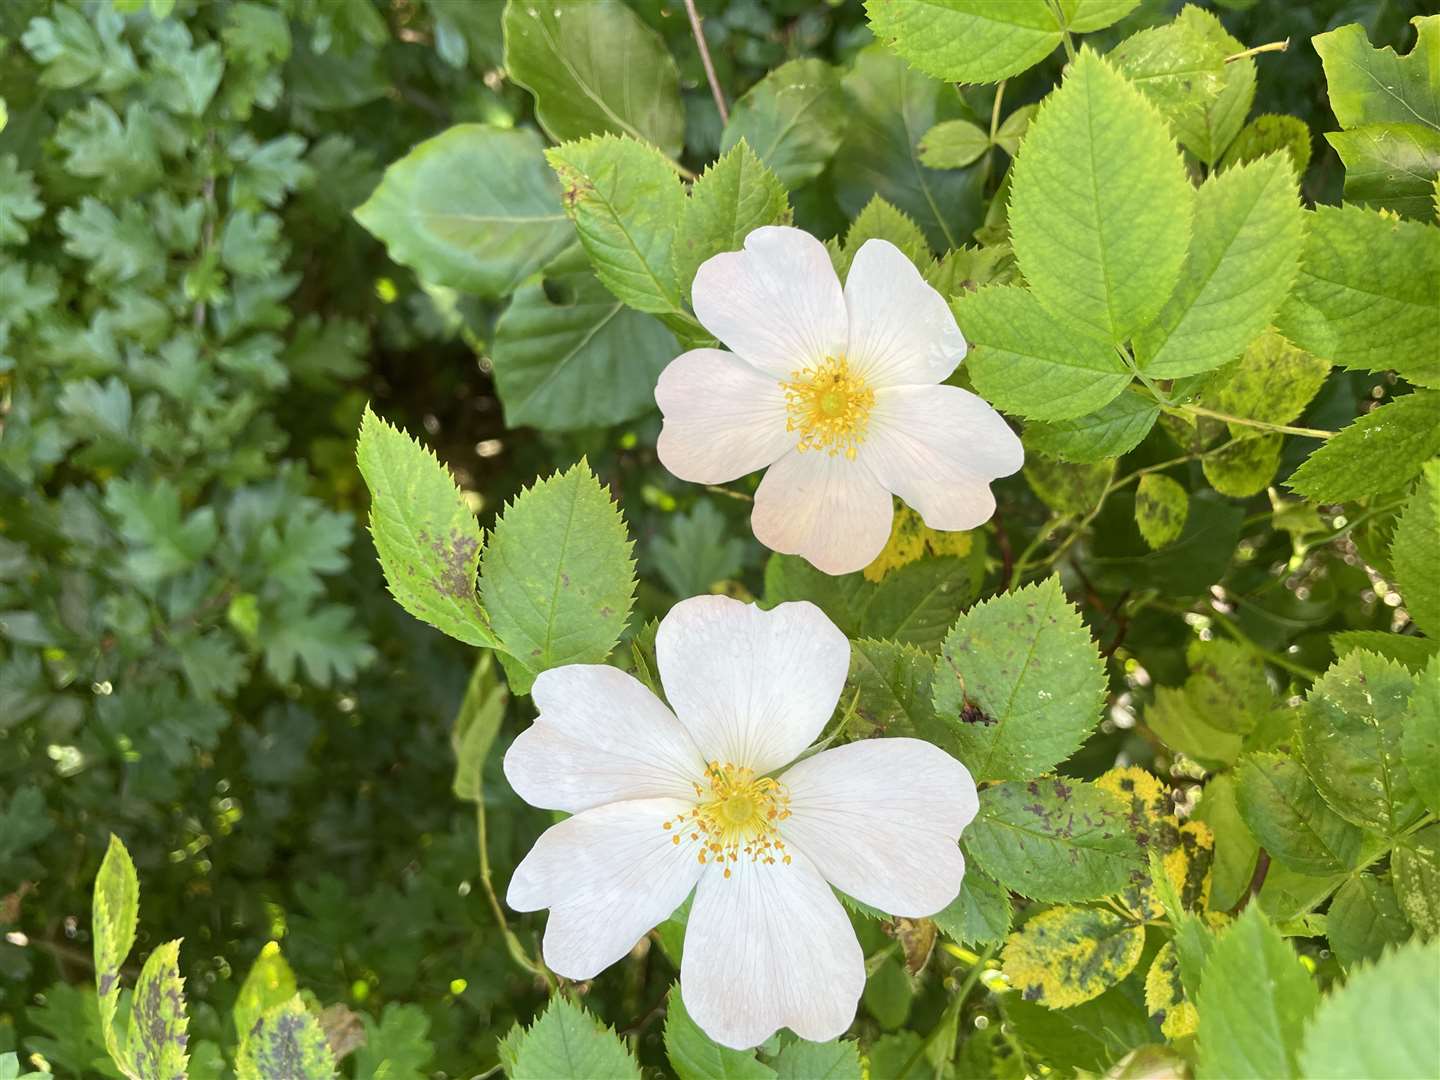 Dog roses on the path beside Kings Golf Course, Inverness. Picture: Jennifer Laws